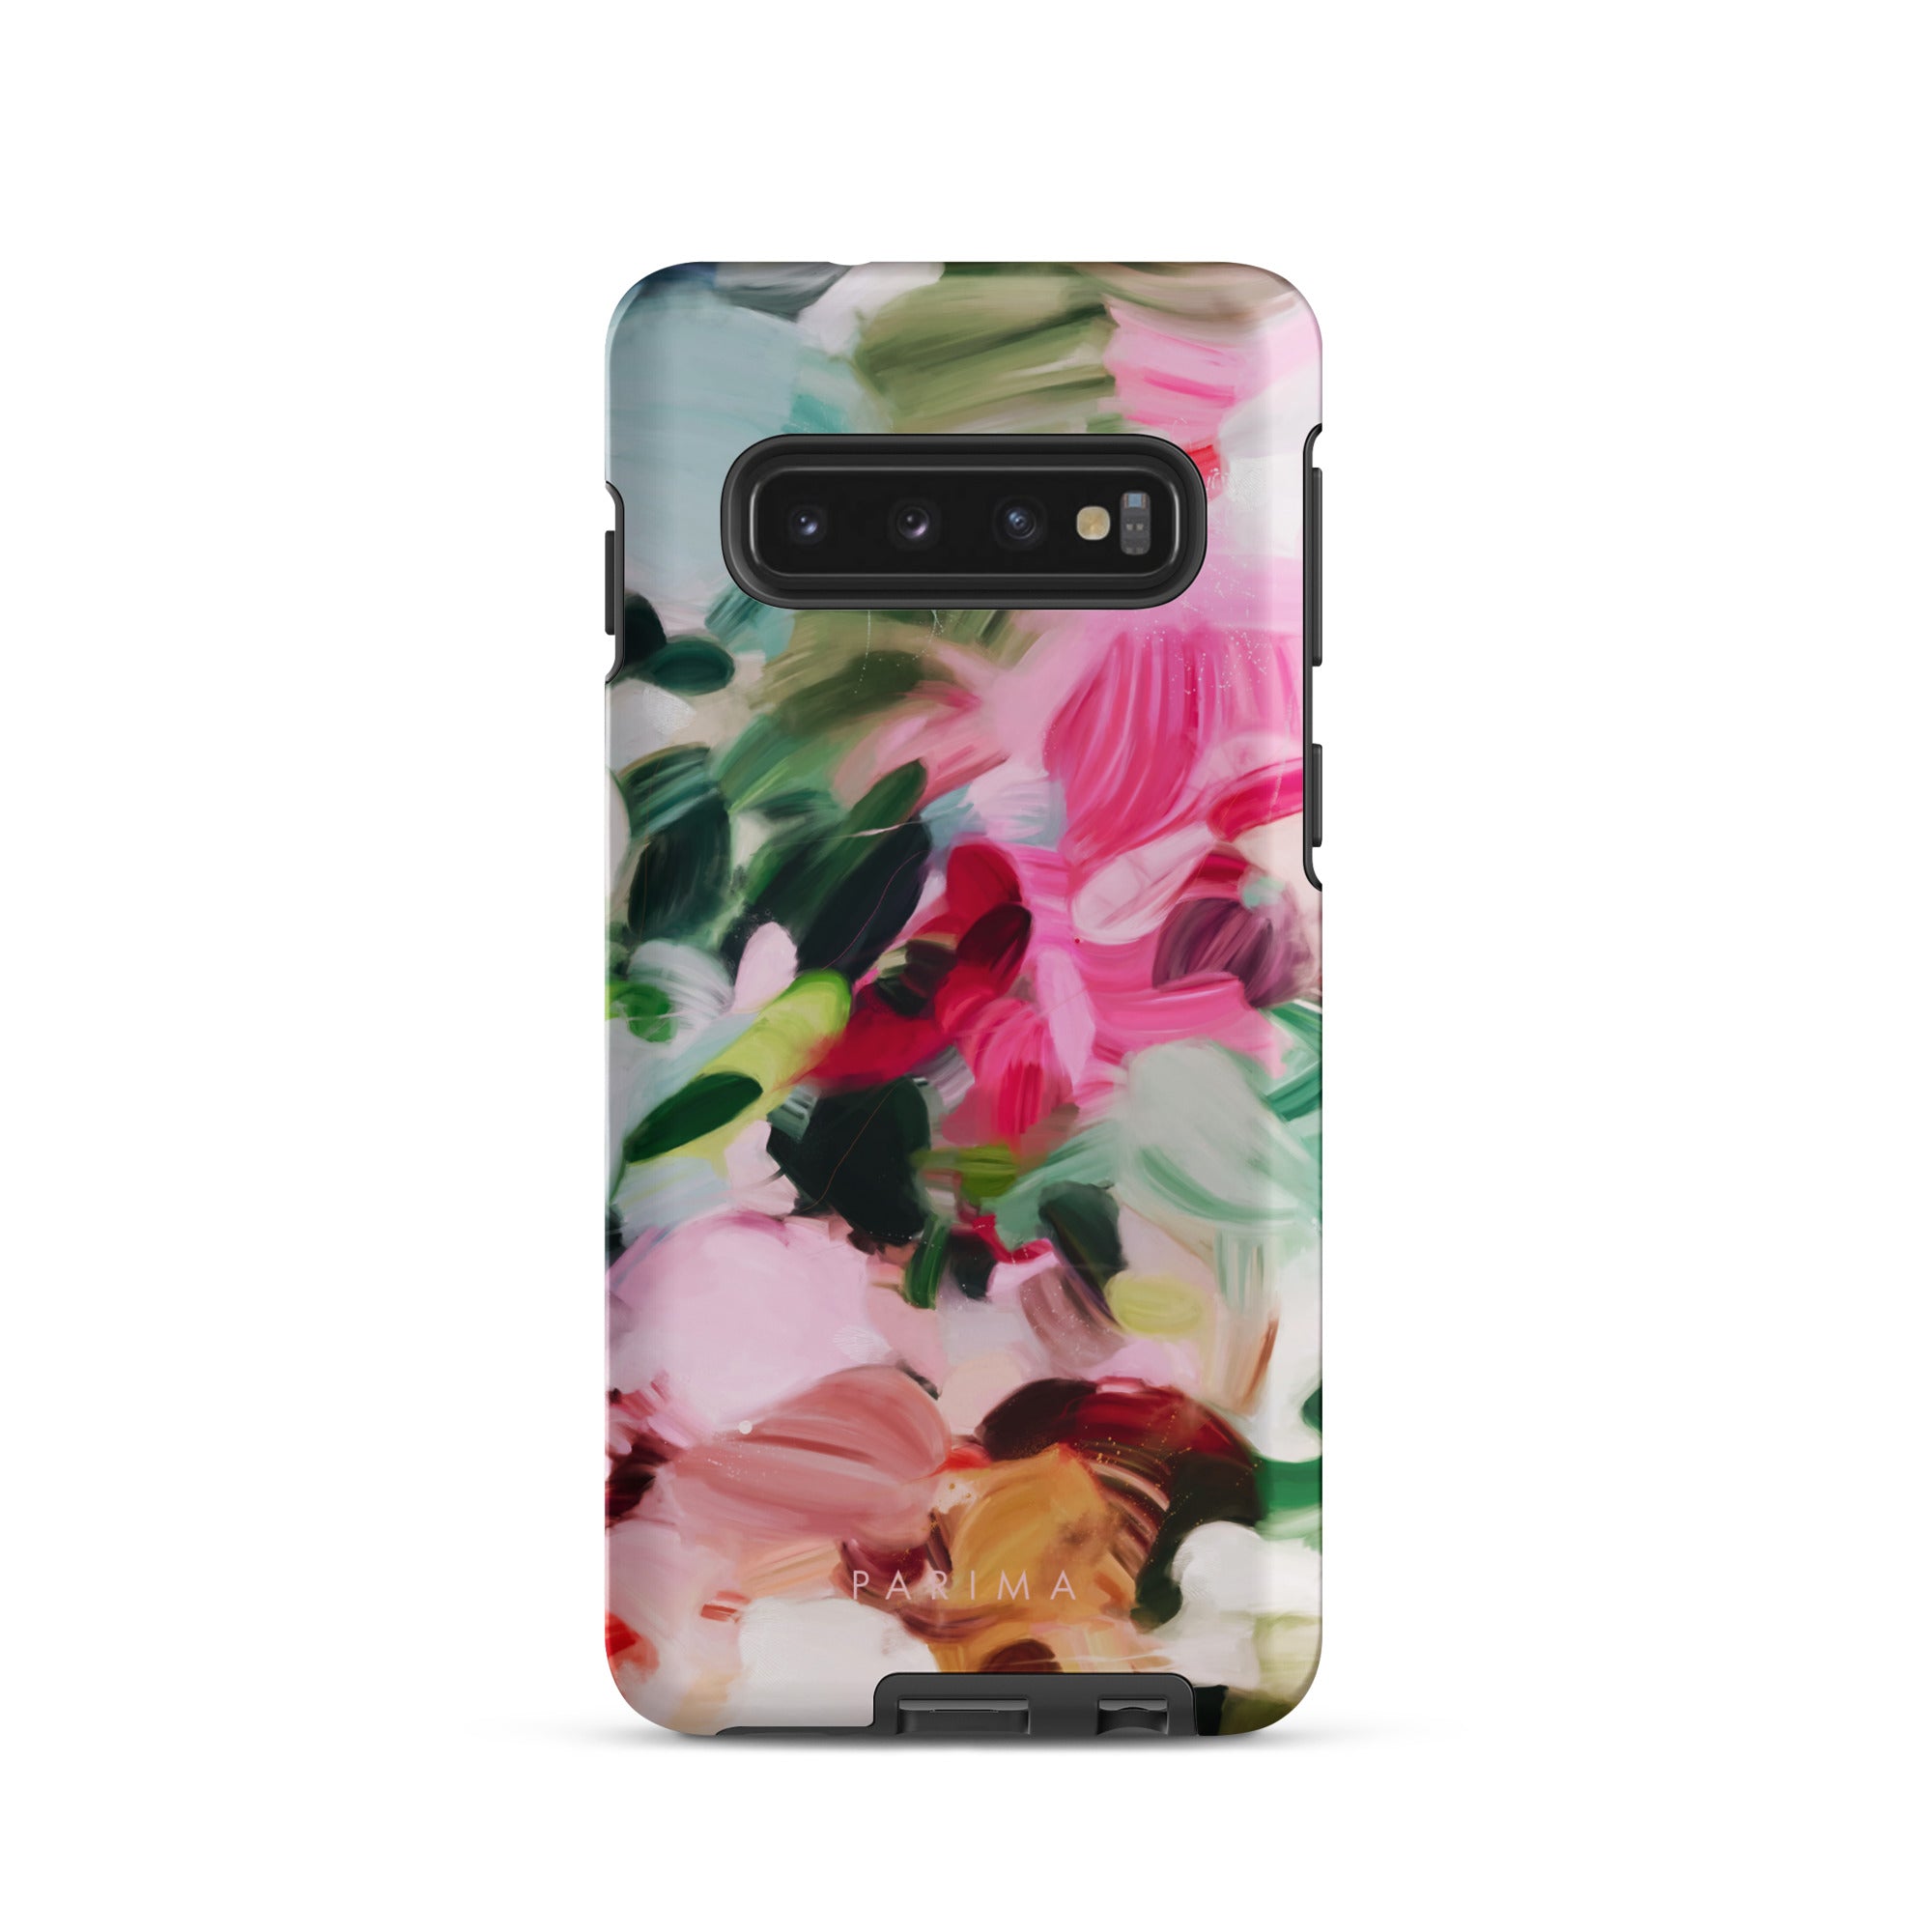 Bloom, pink and green abstract art on Samsung Galaxy S10 tough case by Parima Studio